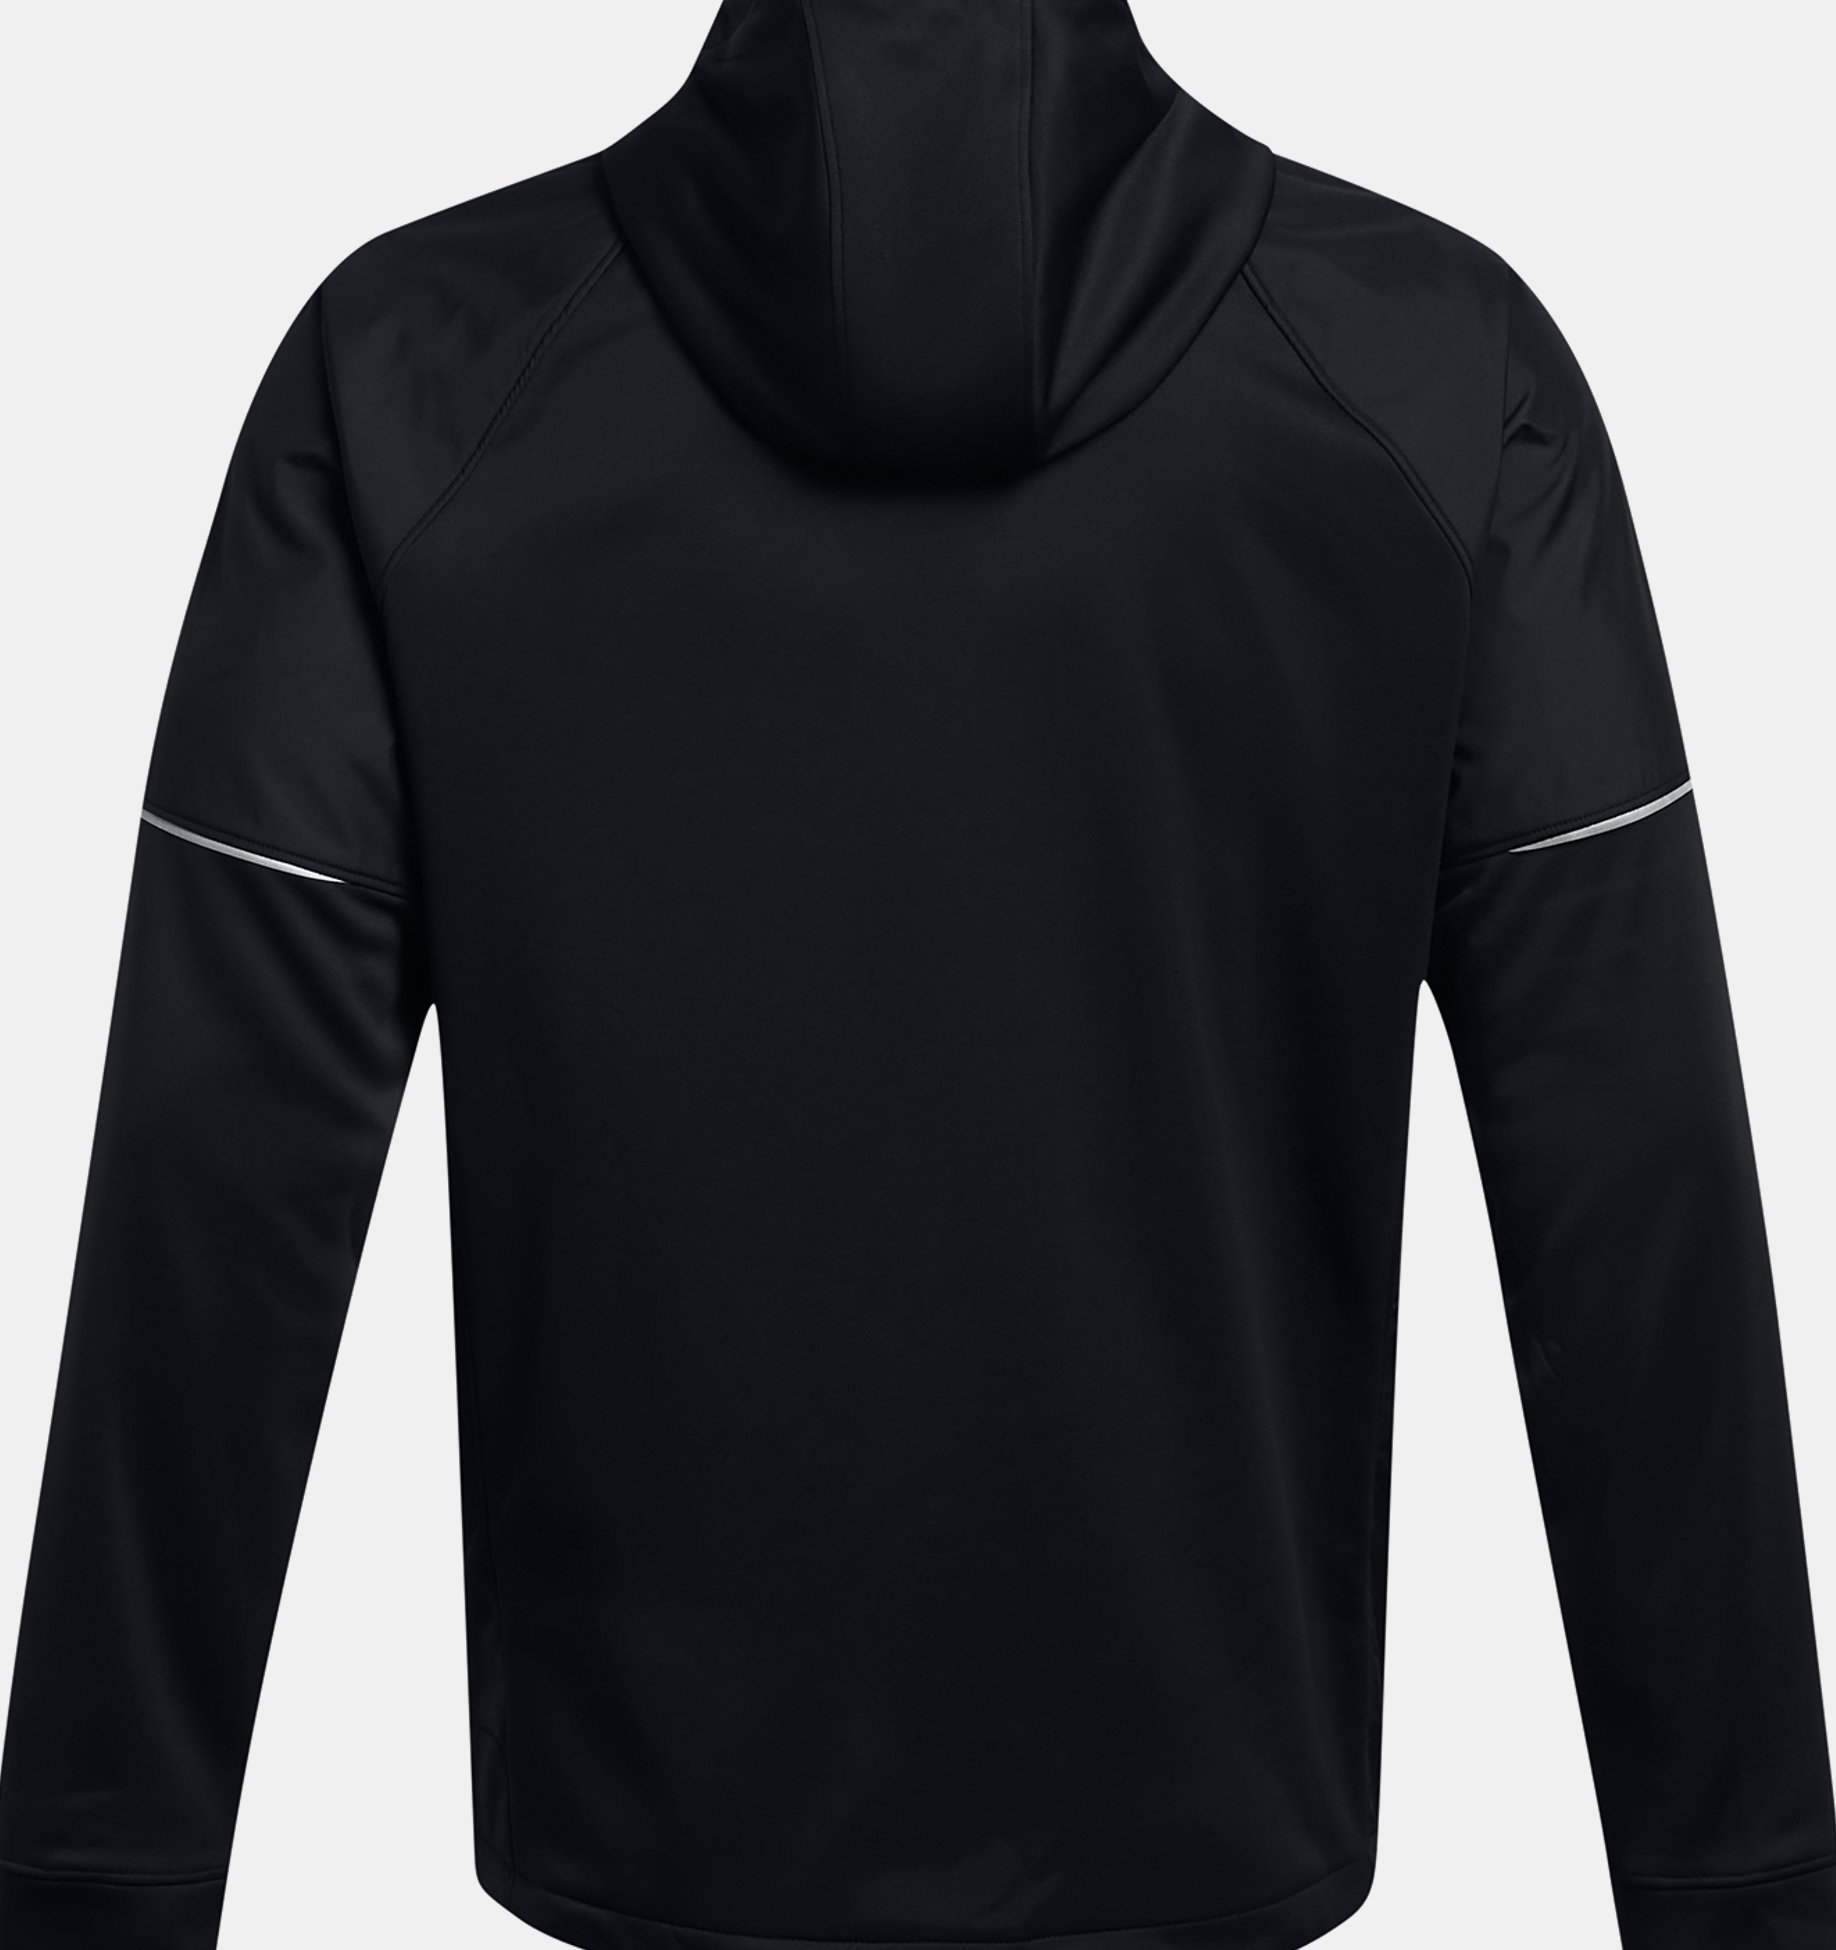 https://underarmour.scene7.com/is/image/Underarmour/PS1379693-001_HB?rp=standard-0pad|pdpZoomDesktop&scl=0.72&fmt=jpg&qlt=85&resMode=sharp2&cache=on,on&bgc=f0f0f0&wid=1836&hei=1950&size=1500,1500